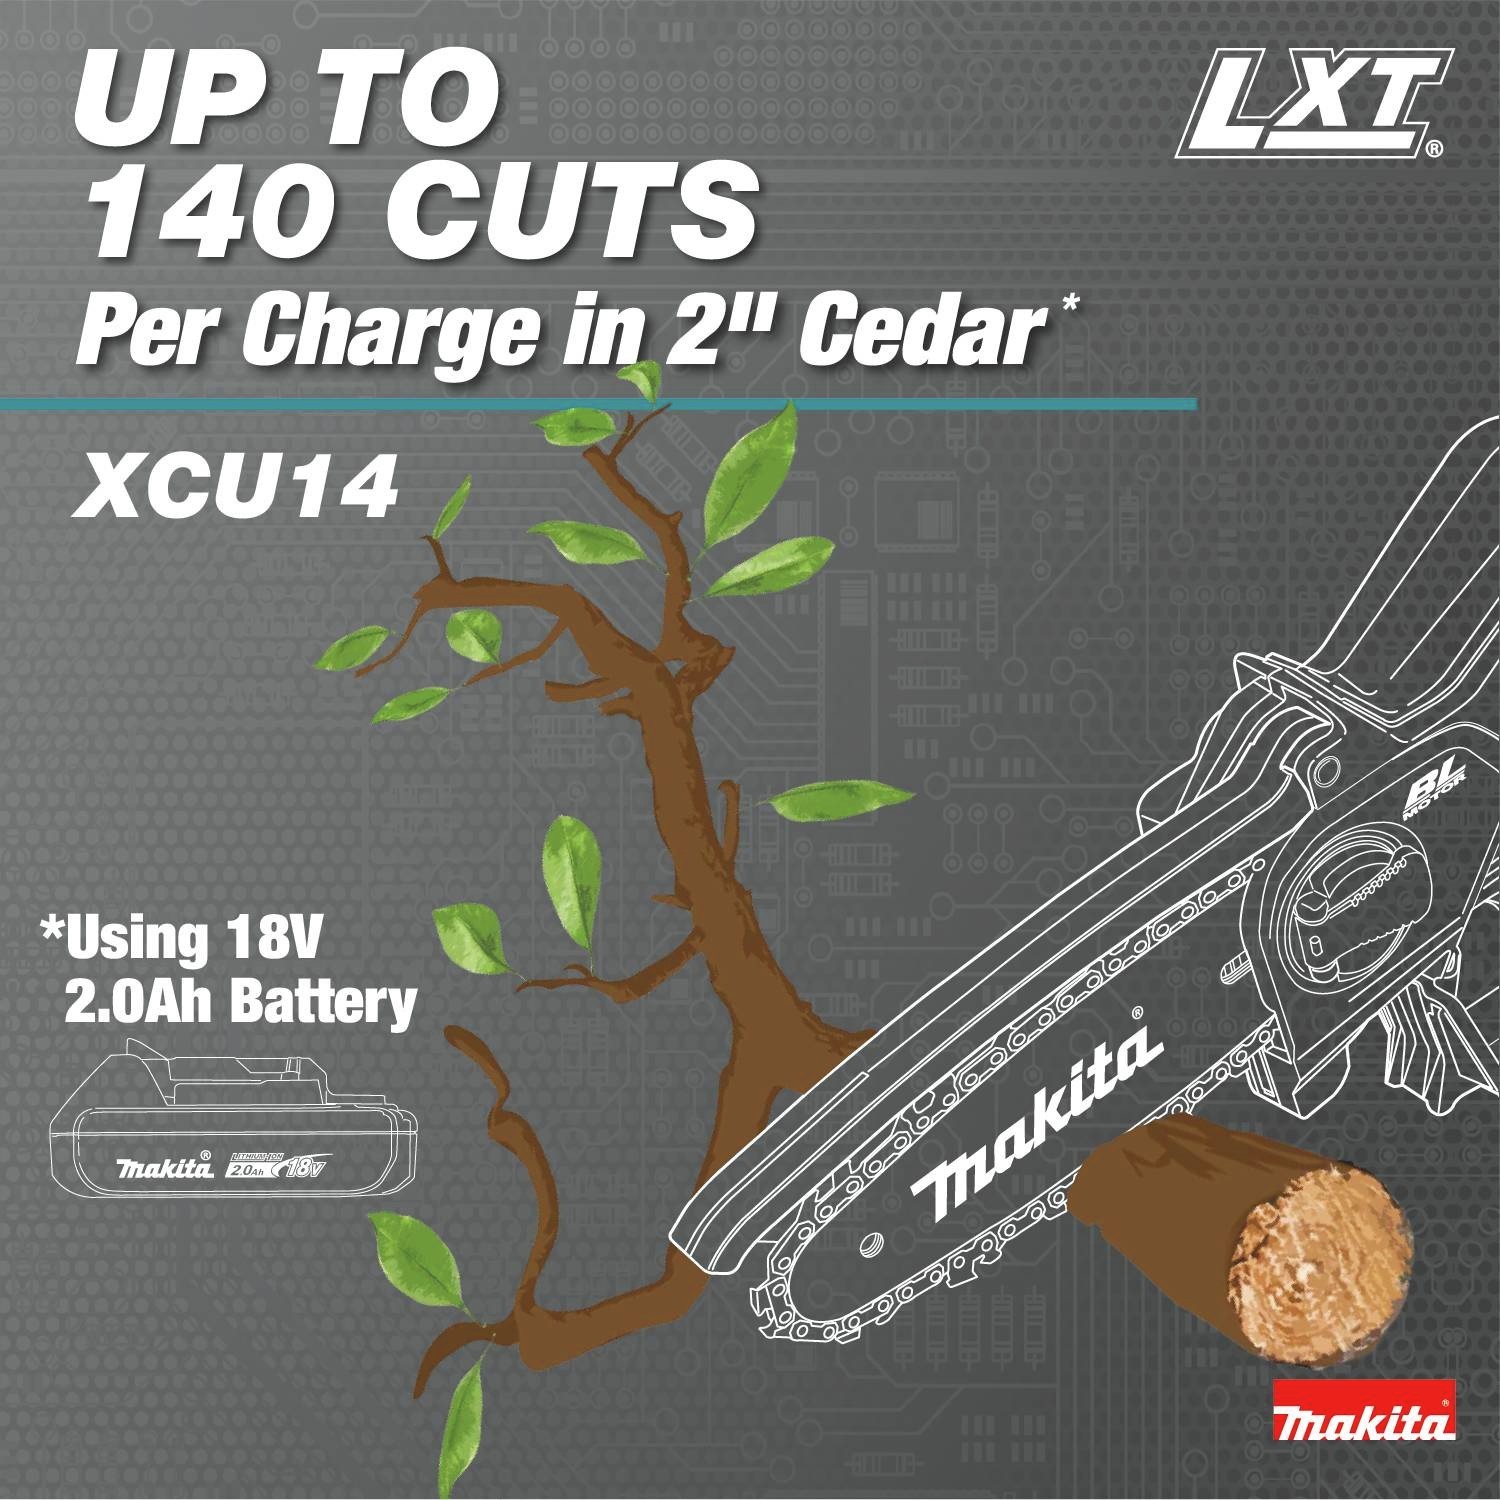 Up to 140 cuts per charge in 2 in. cedar using 18V 2 Ah battery